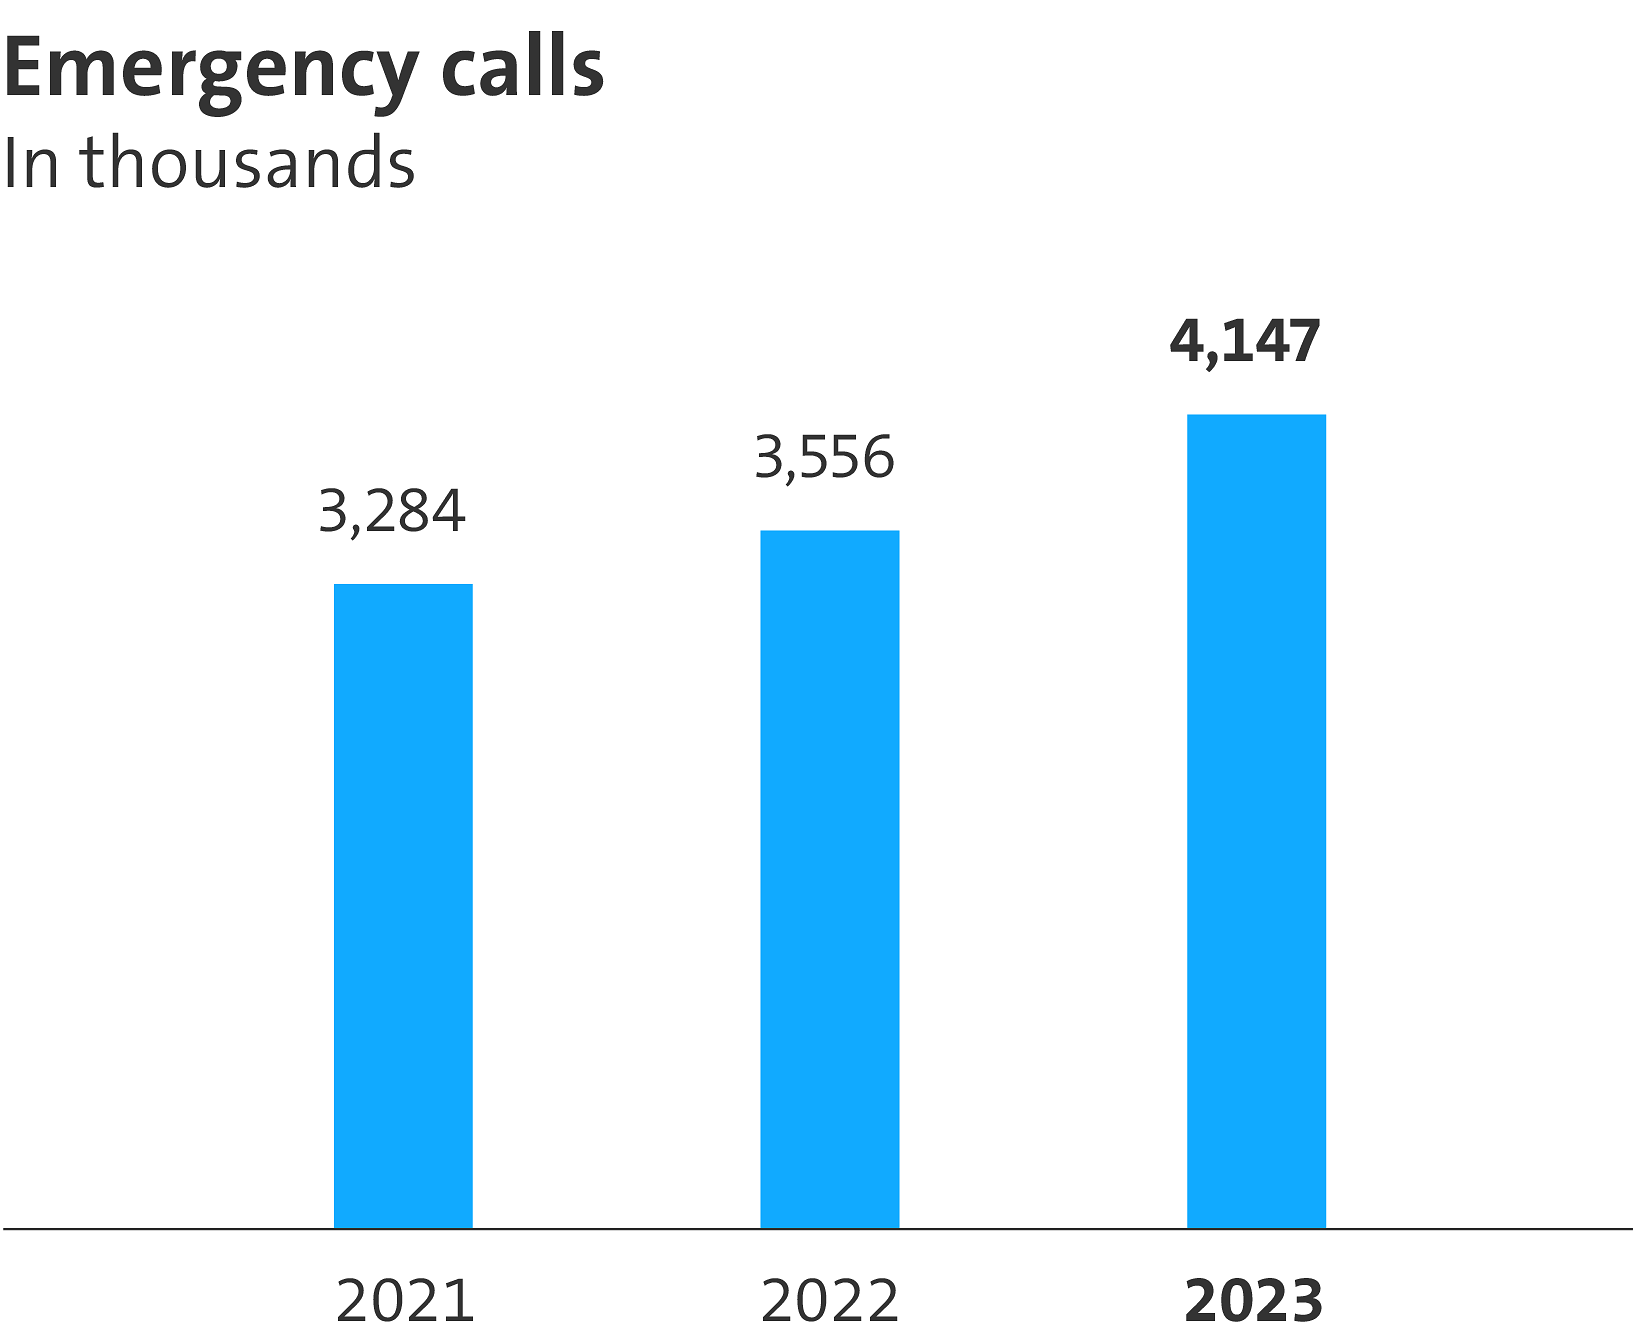 The graphic shows the number of emergency calls made as part of our basic services: These totalled 4.147 million in the reporting year. The number has risen compared to the previous years.